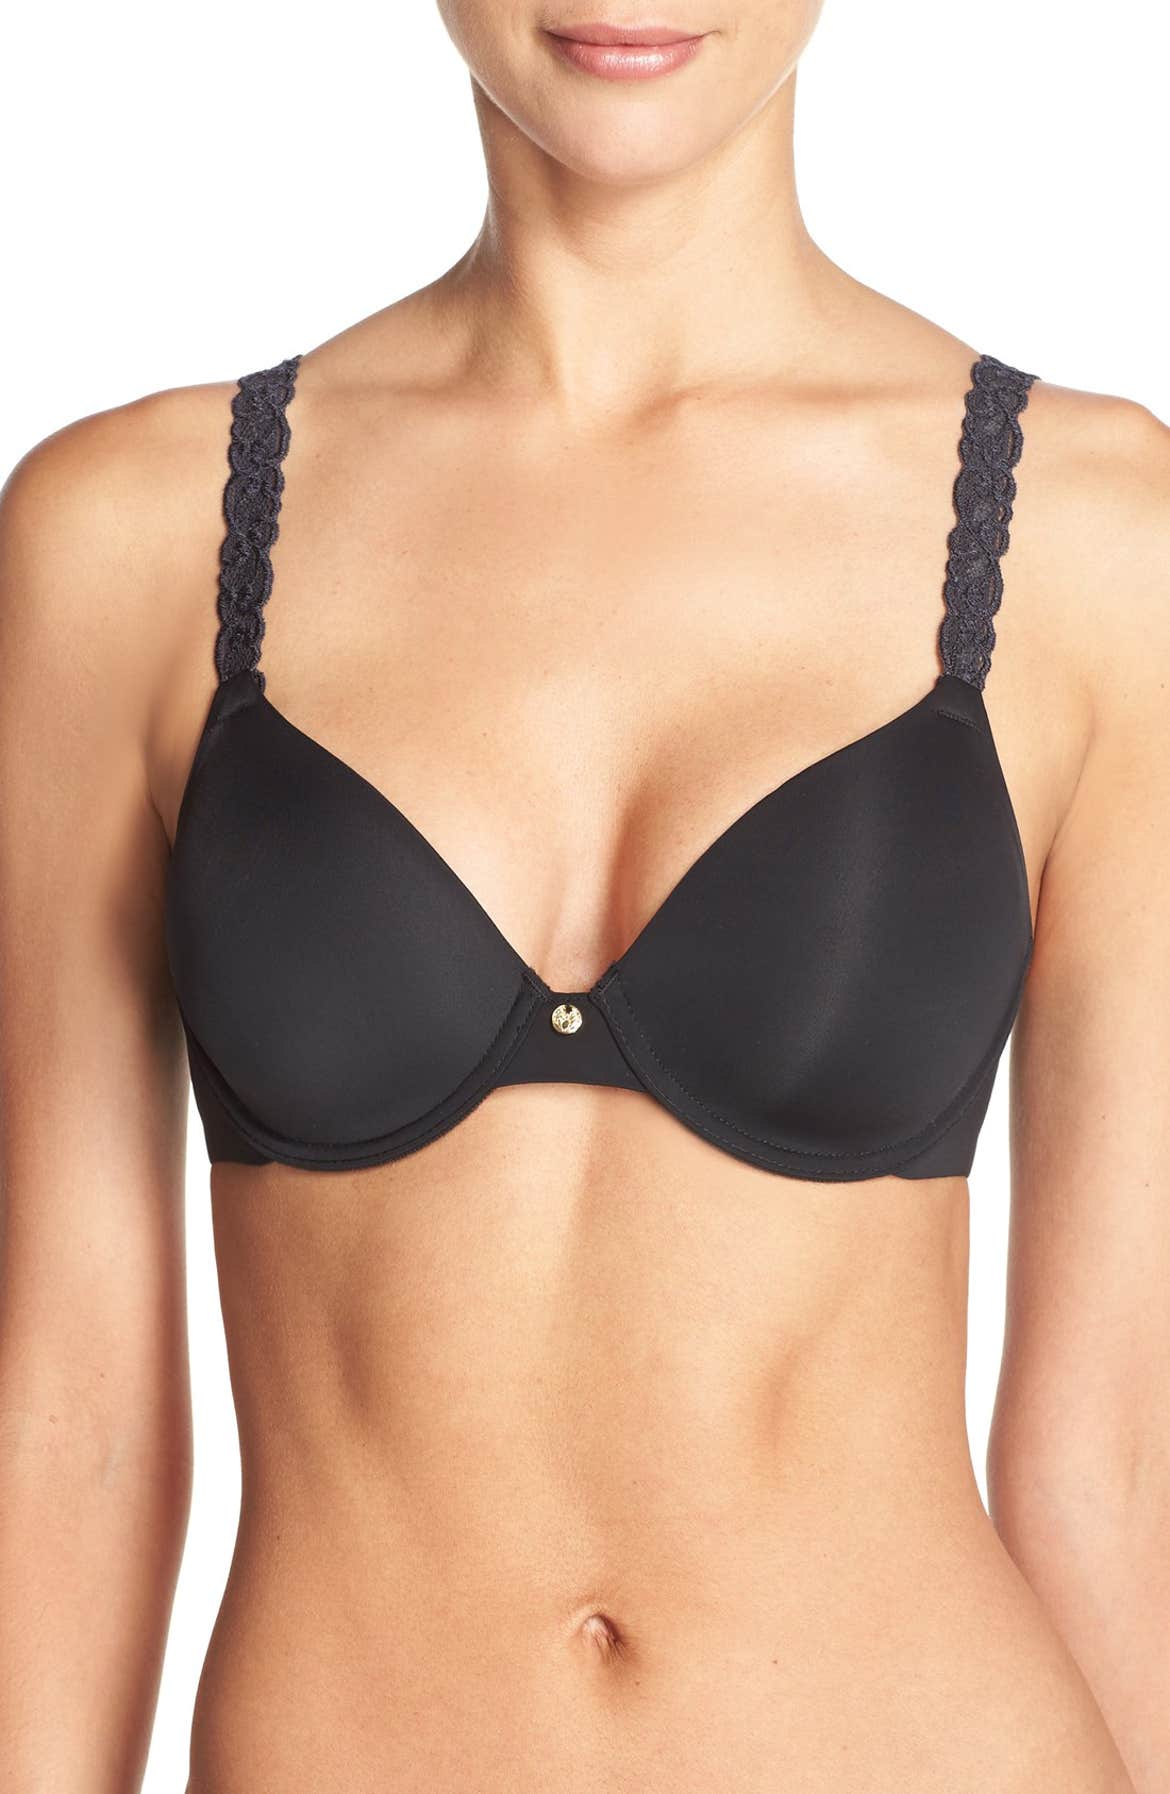 4 bra experts pick the best bras for your body type, for any occasion -  Good Morning America